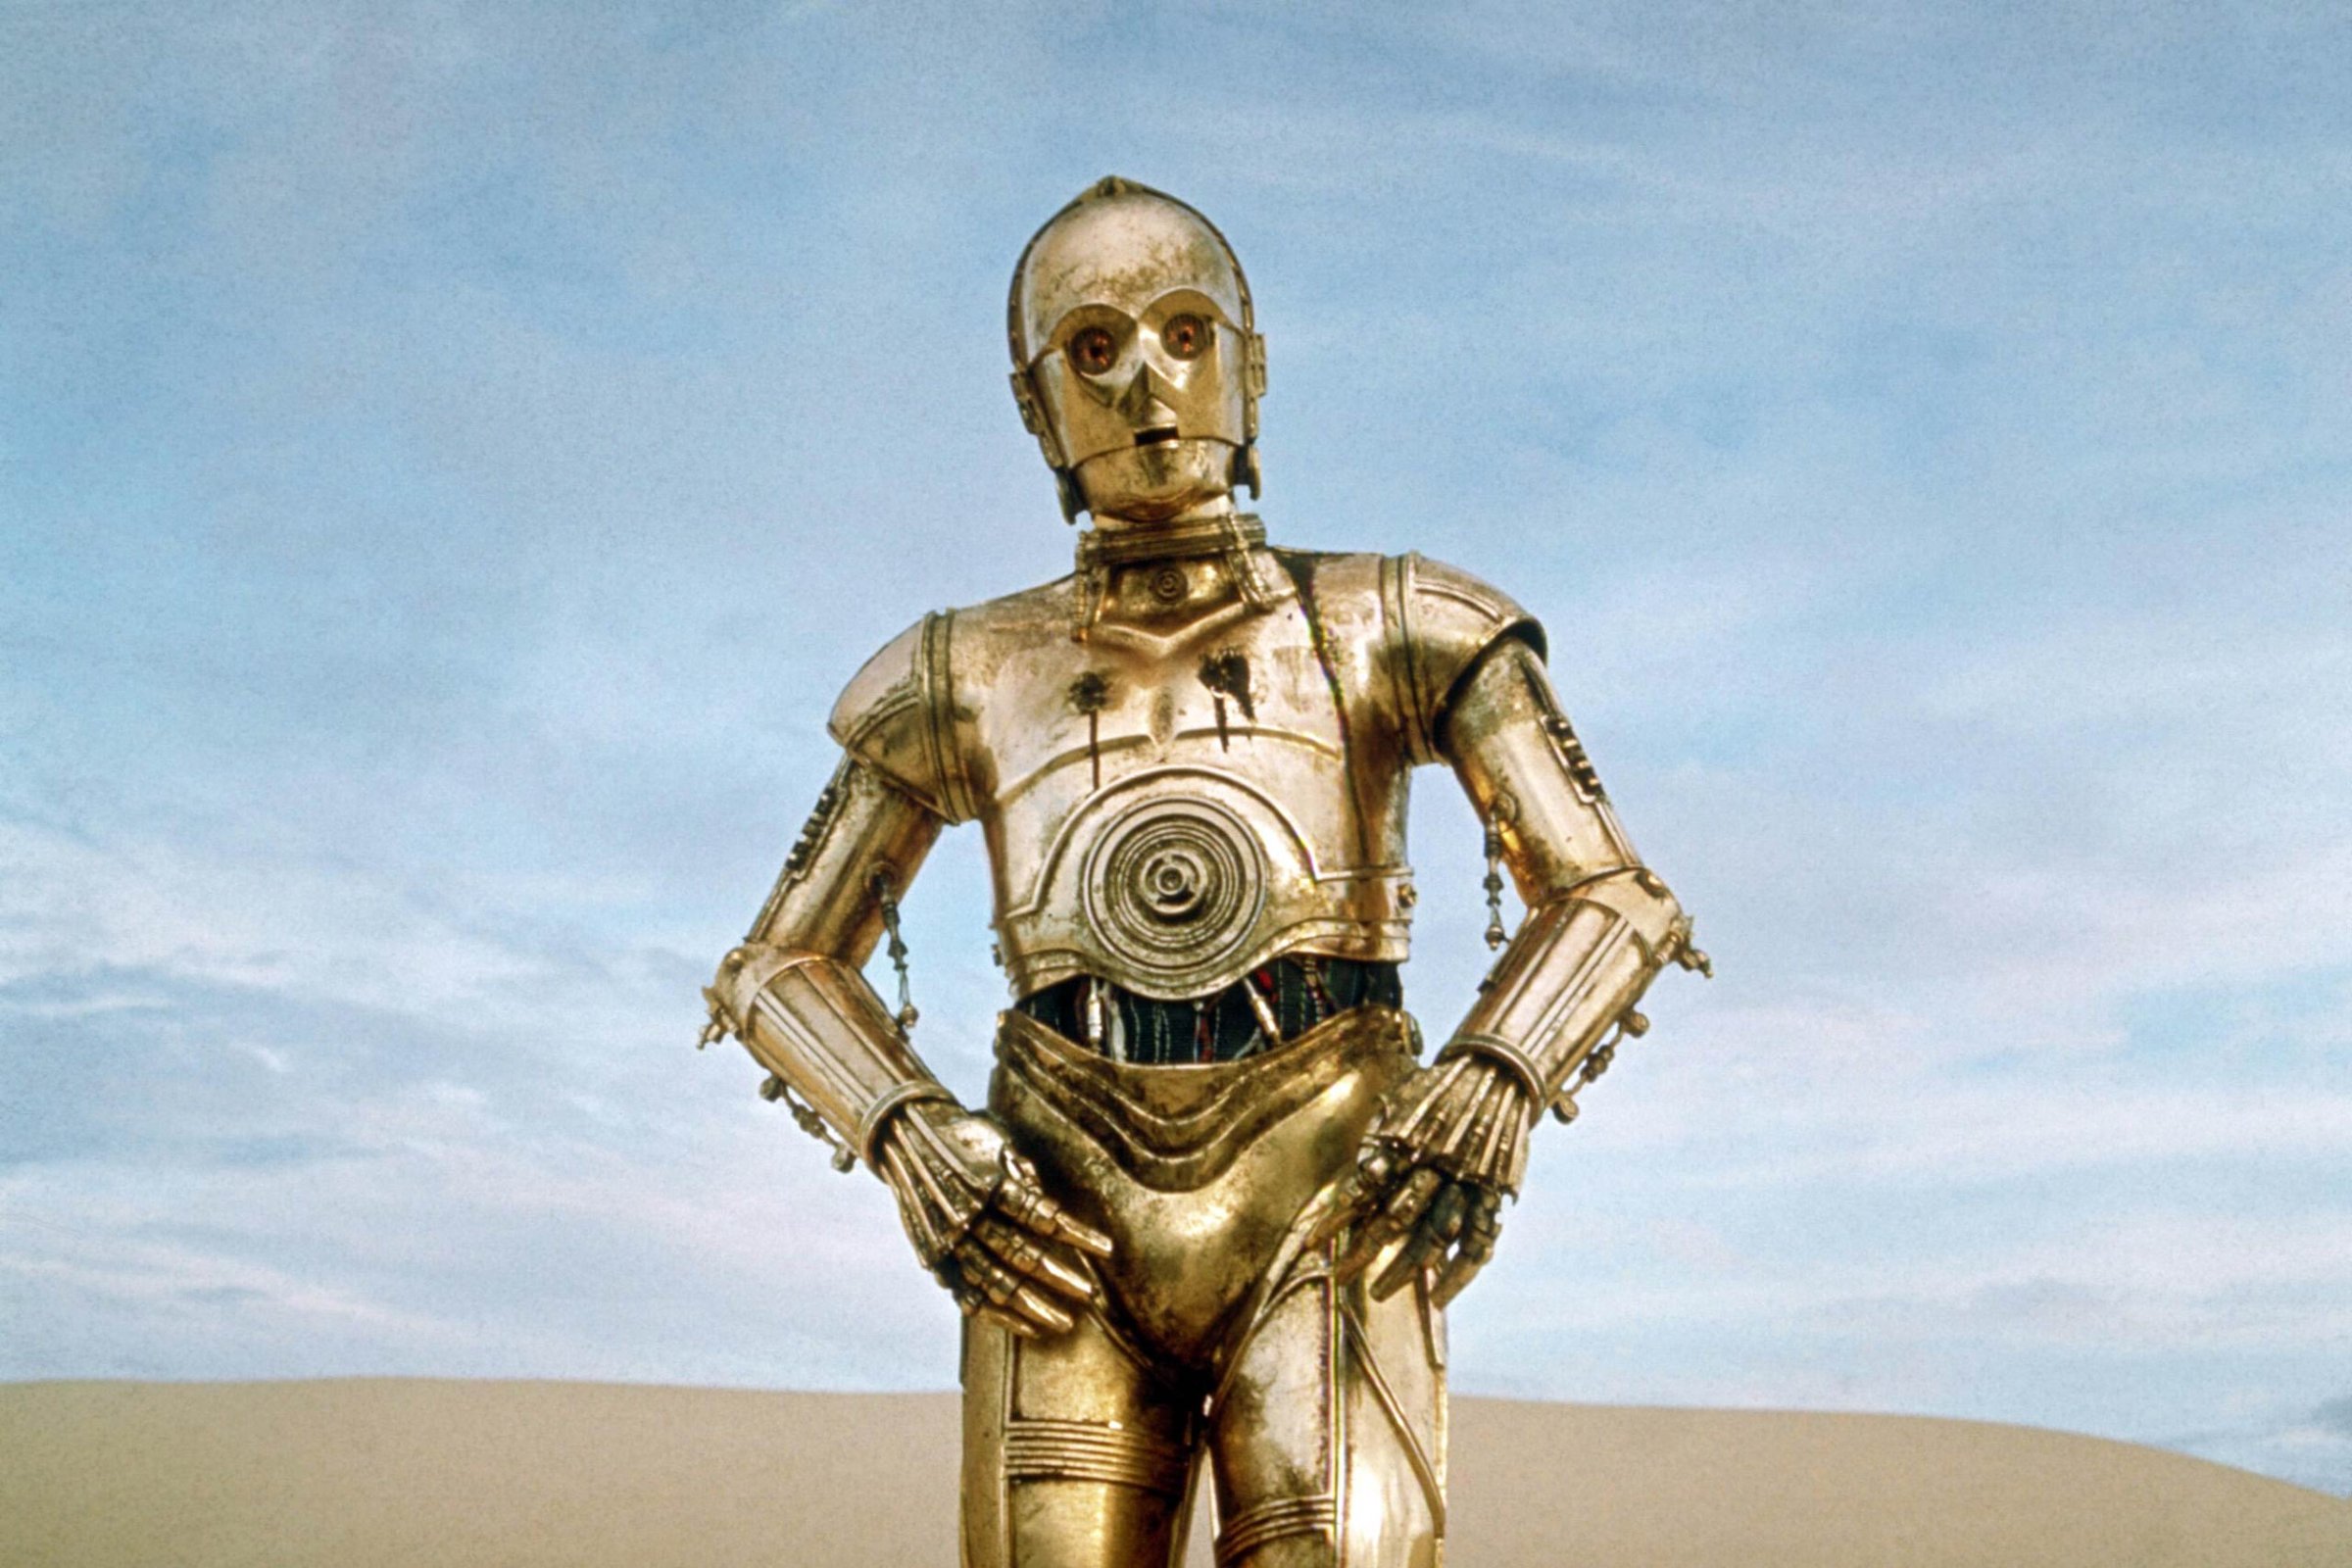 Star Wars (1977)Directed by George LucasShown: Anthony Daniels (as C-3PO)